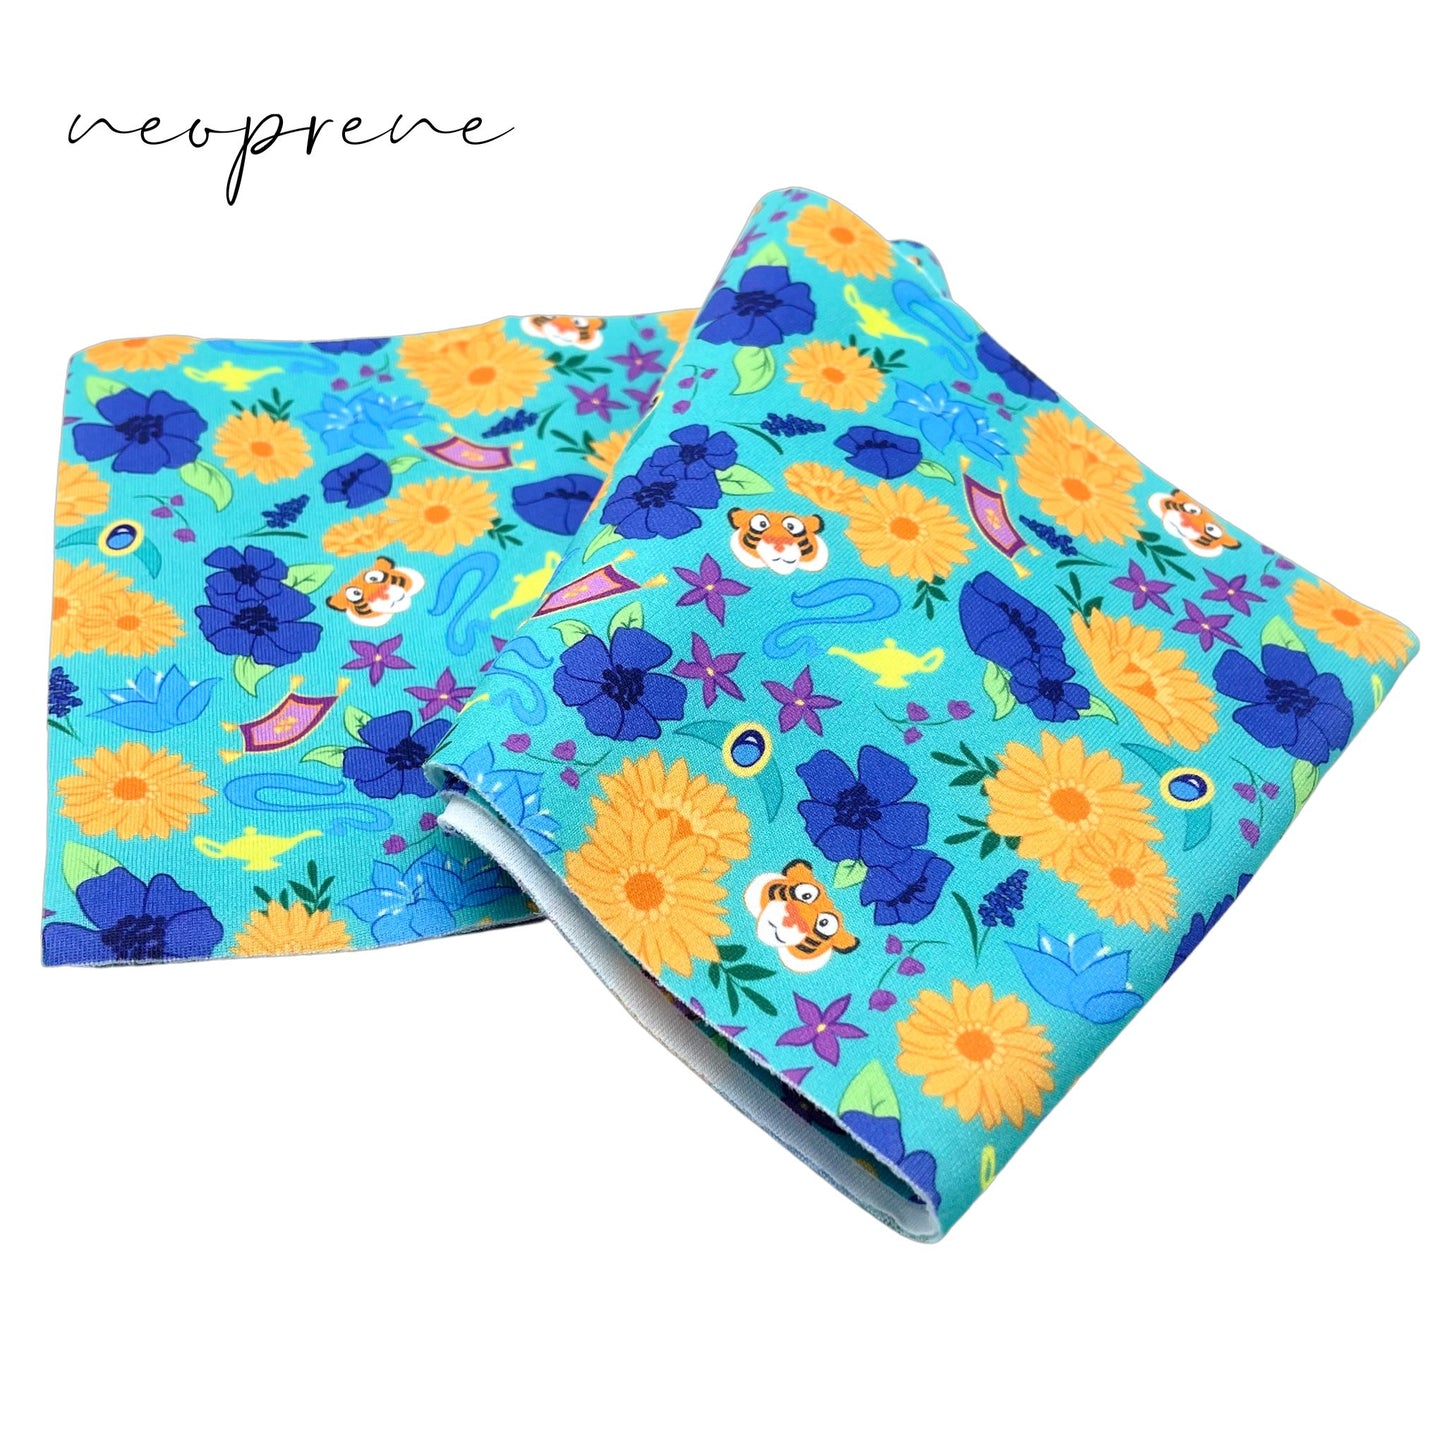 Folded padded aqua neoprene fabric with royal, golden yellow, and purple floral princess pattern including flying carpets, tiger face, and magic lamps.